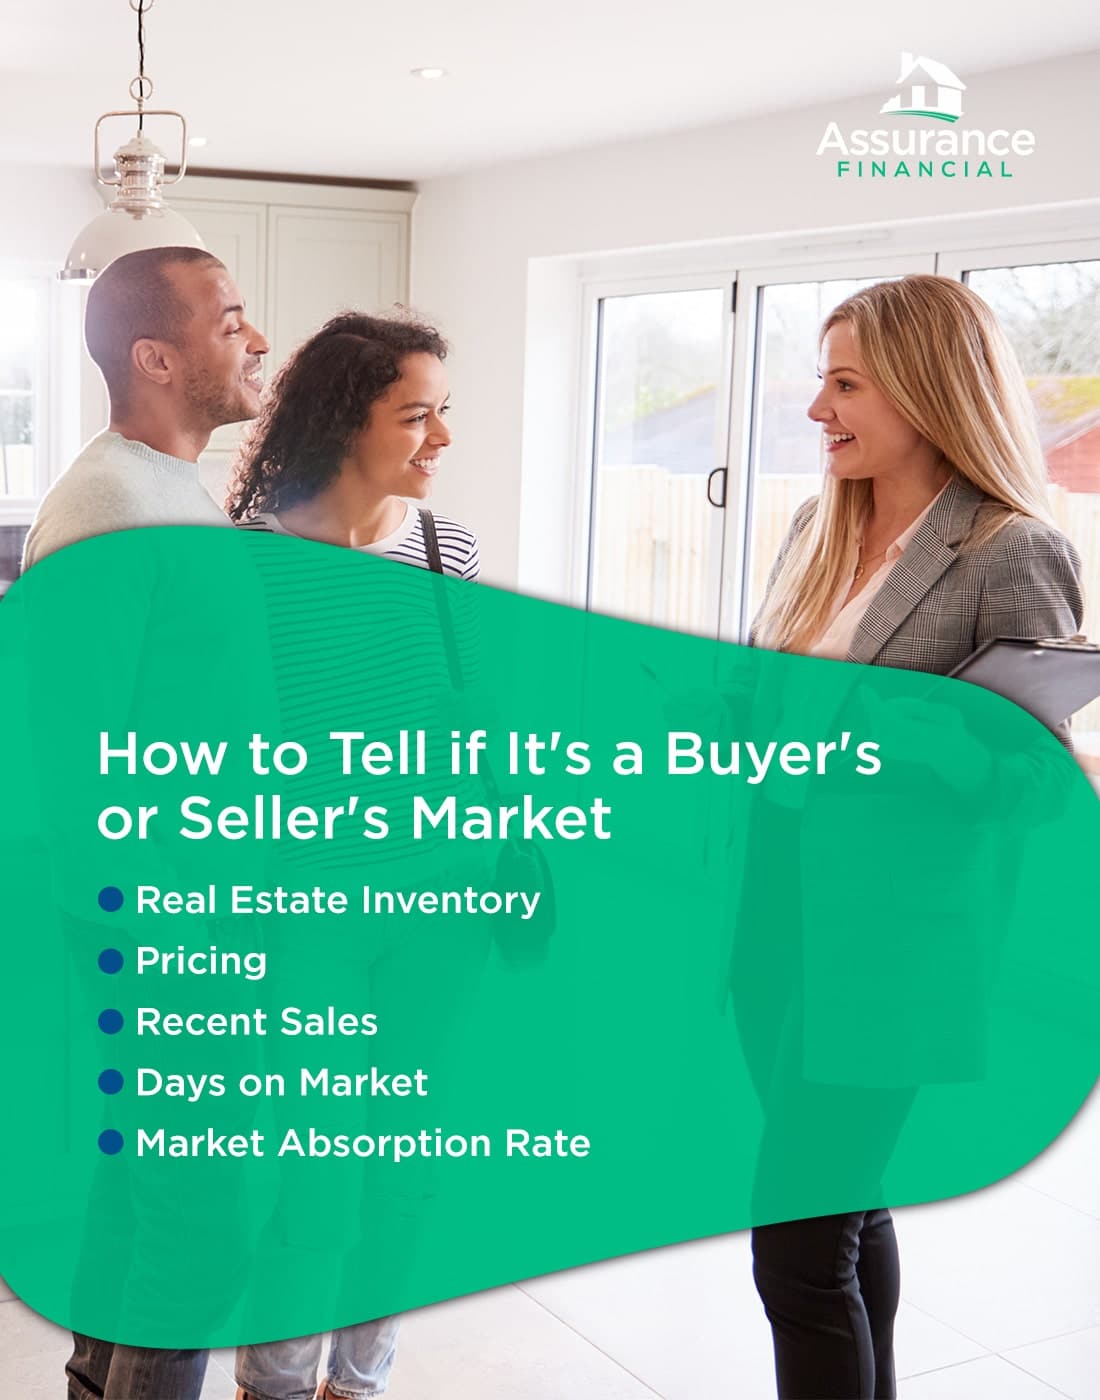 Graphic: How to tell if it's a buyer's or seller's market.